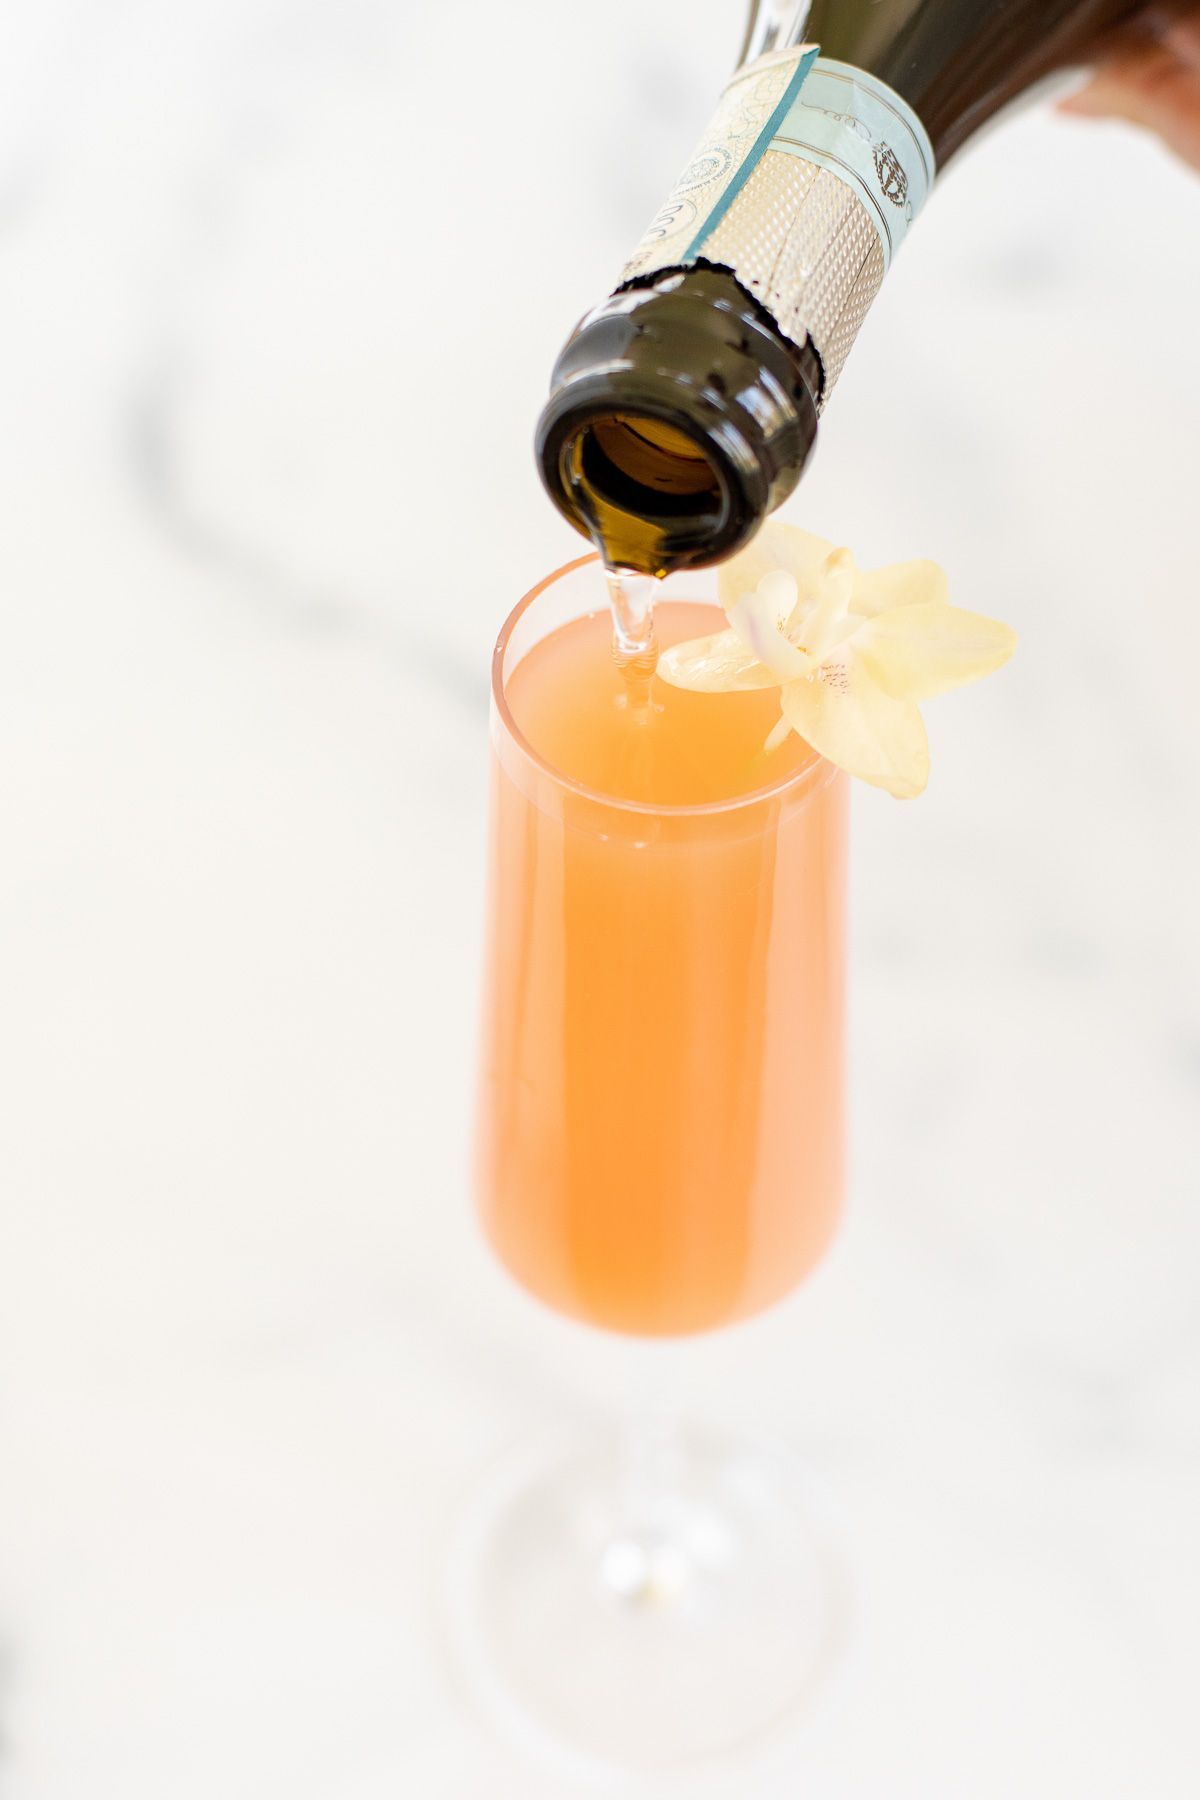 A grapefruit mimosa on a marble surface, garnished with a flower and a slice of grapefruit